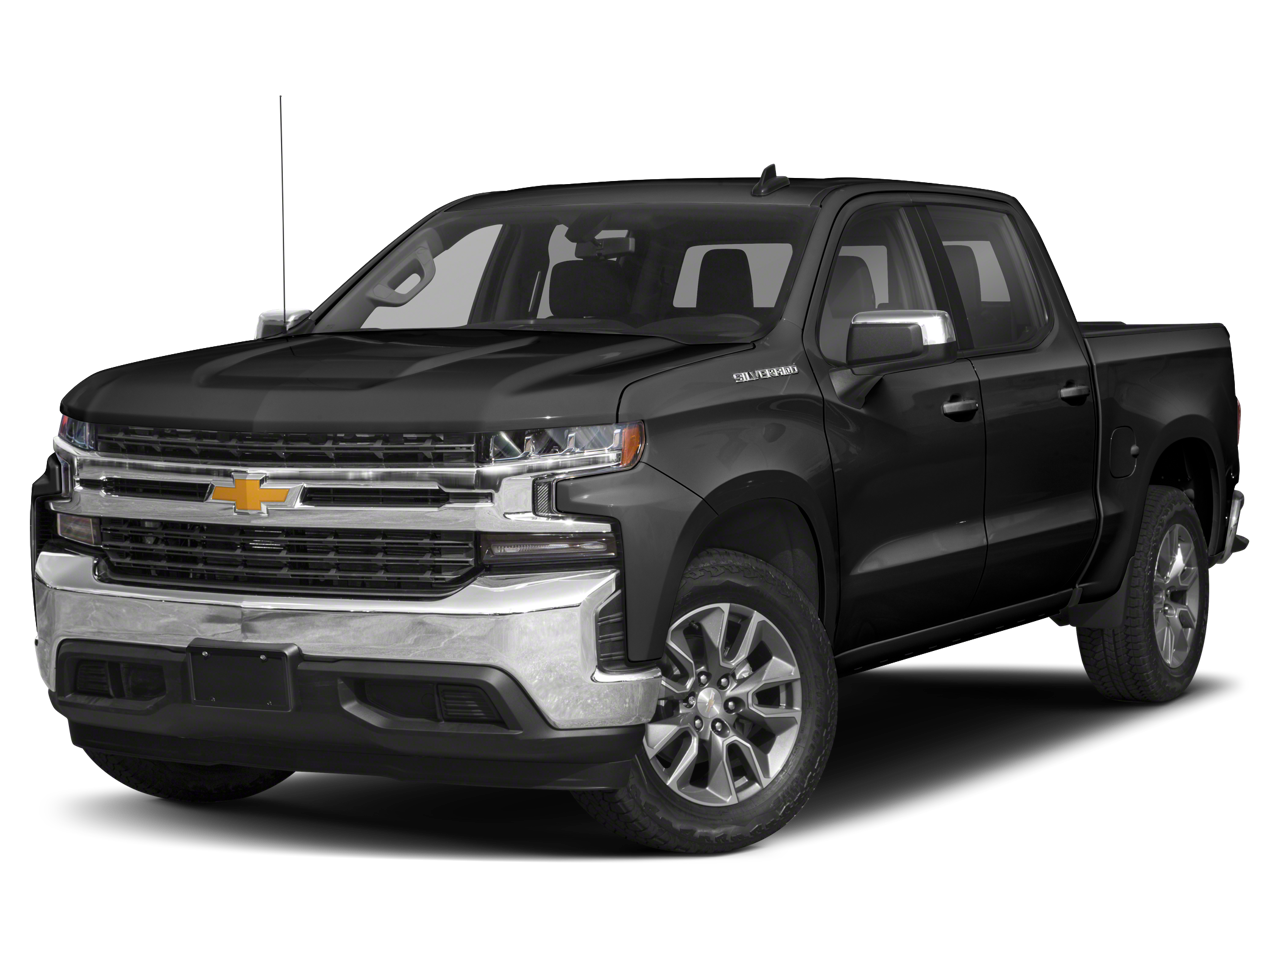 Used 2019 Chevrolet Silverado 1500 LT with VIN 3GCUYDED8KG147470 for sale in Mankato, Minnesota